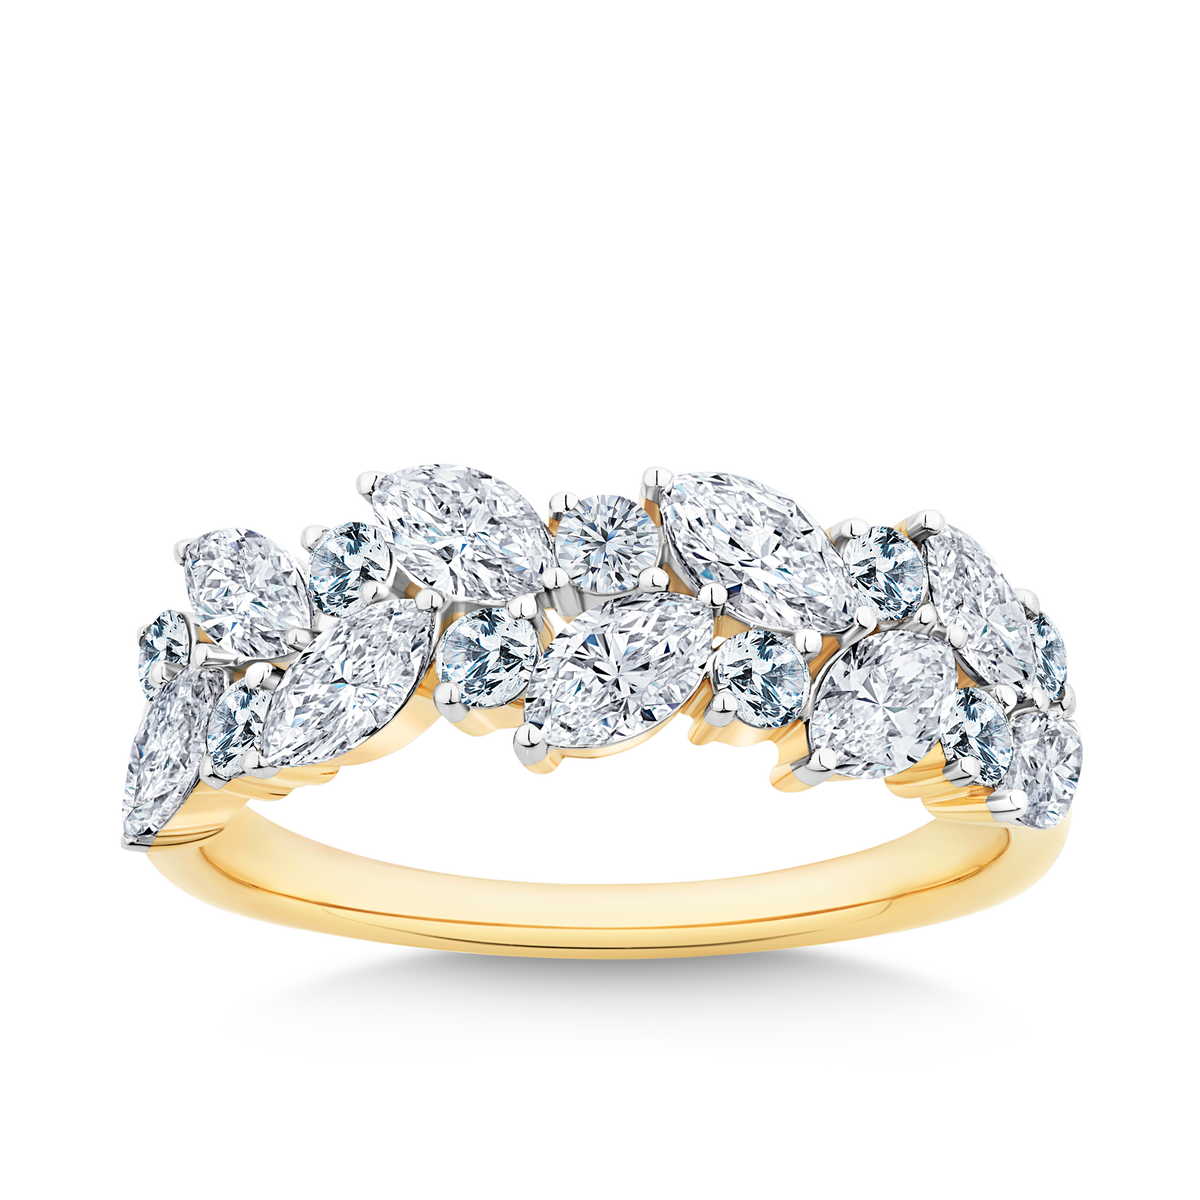 1.32ct TW Diamond Cluster Dress Ring in 9ct Yellow Gold